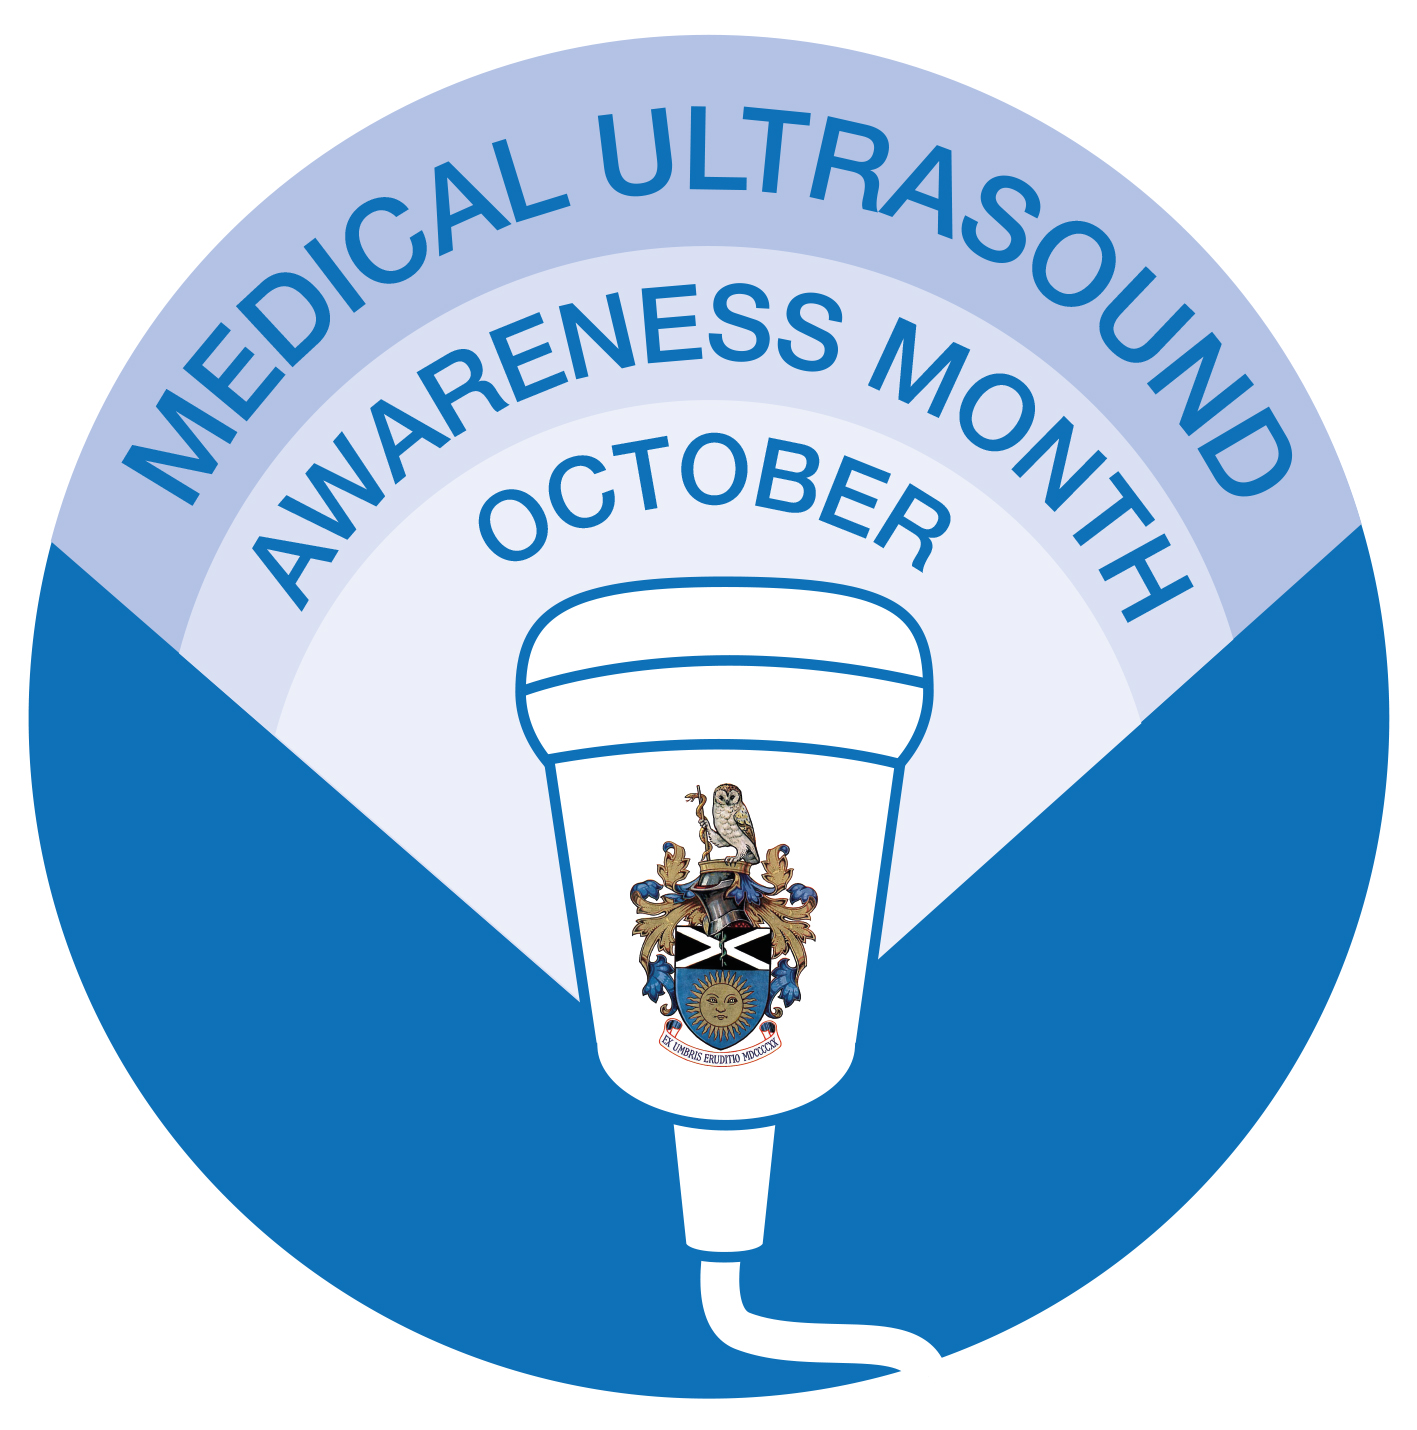 This is Medical Ultrasound Awareness Month MUAM SoR